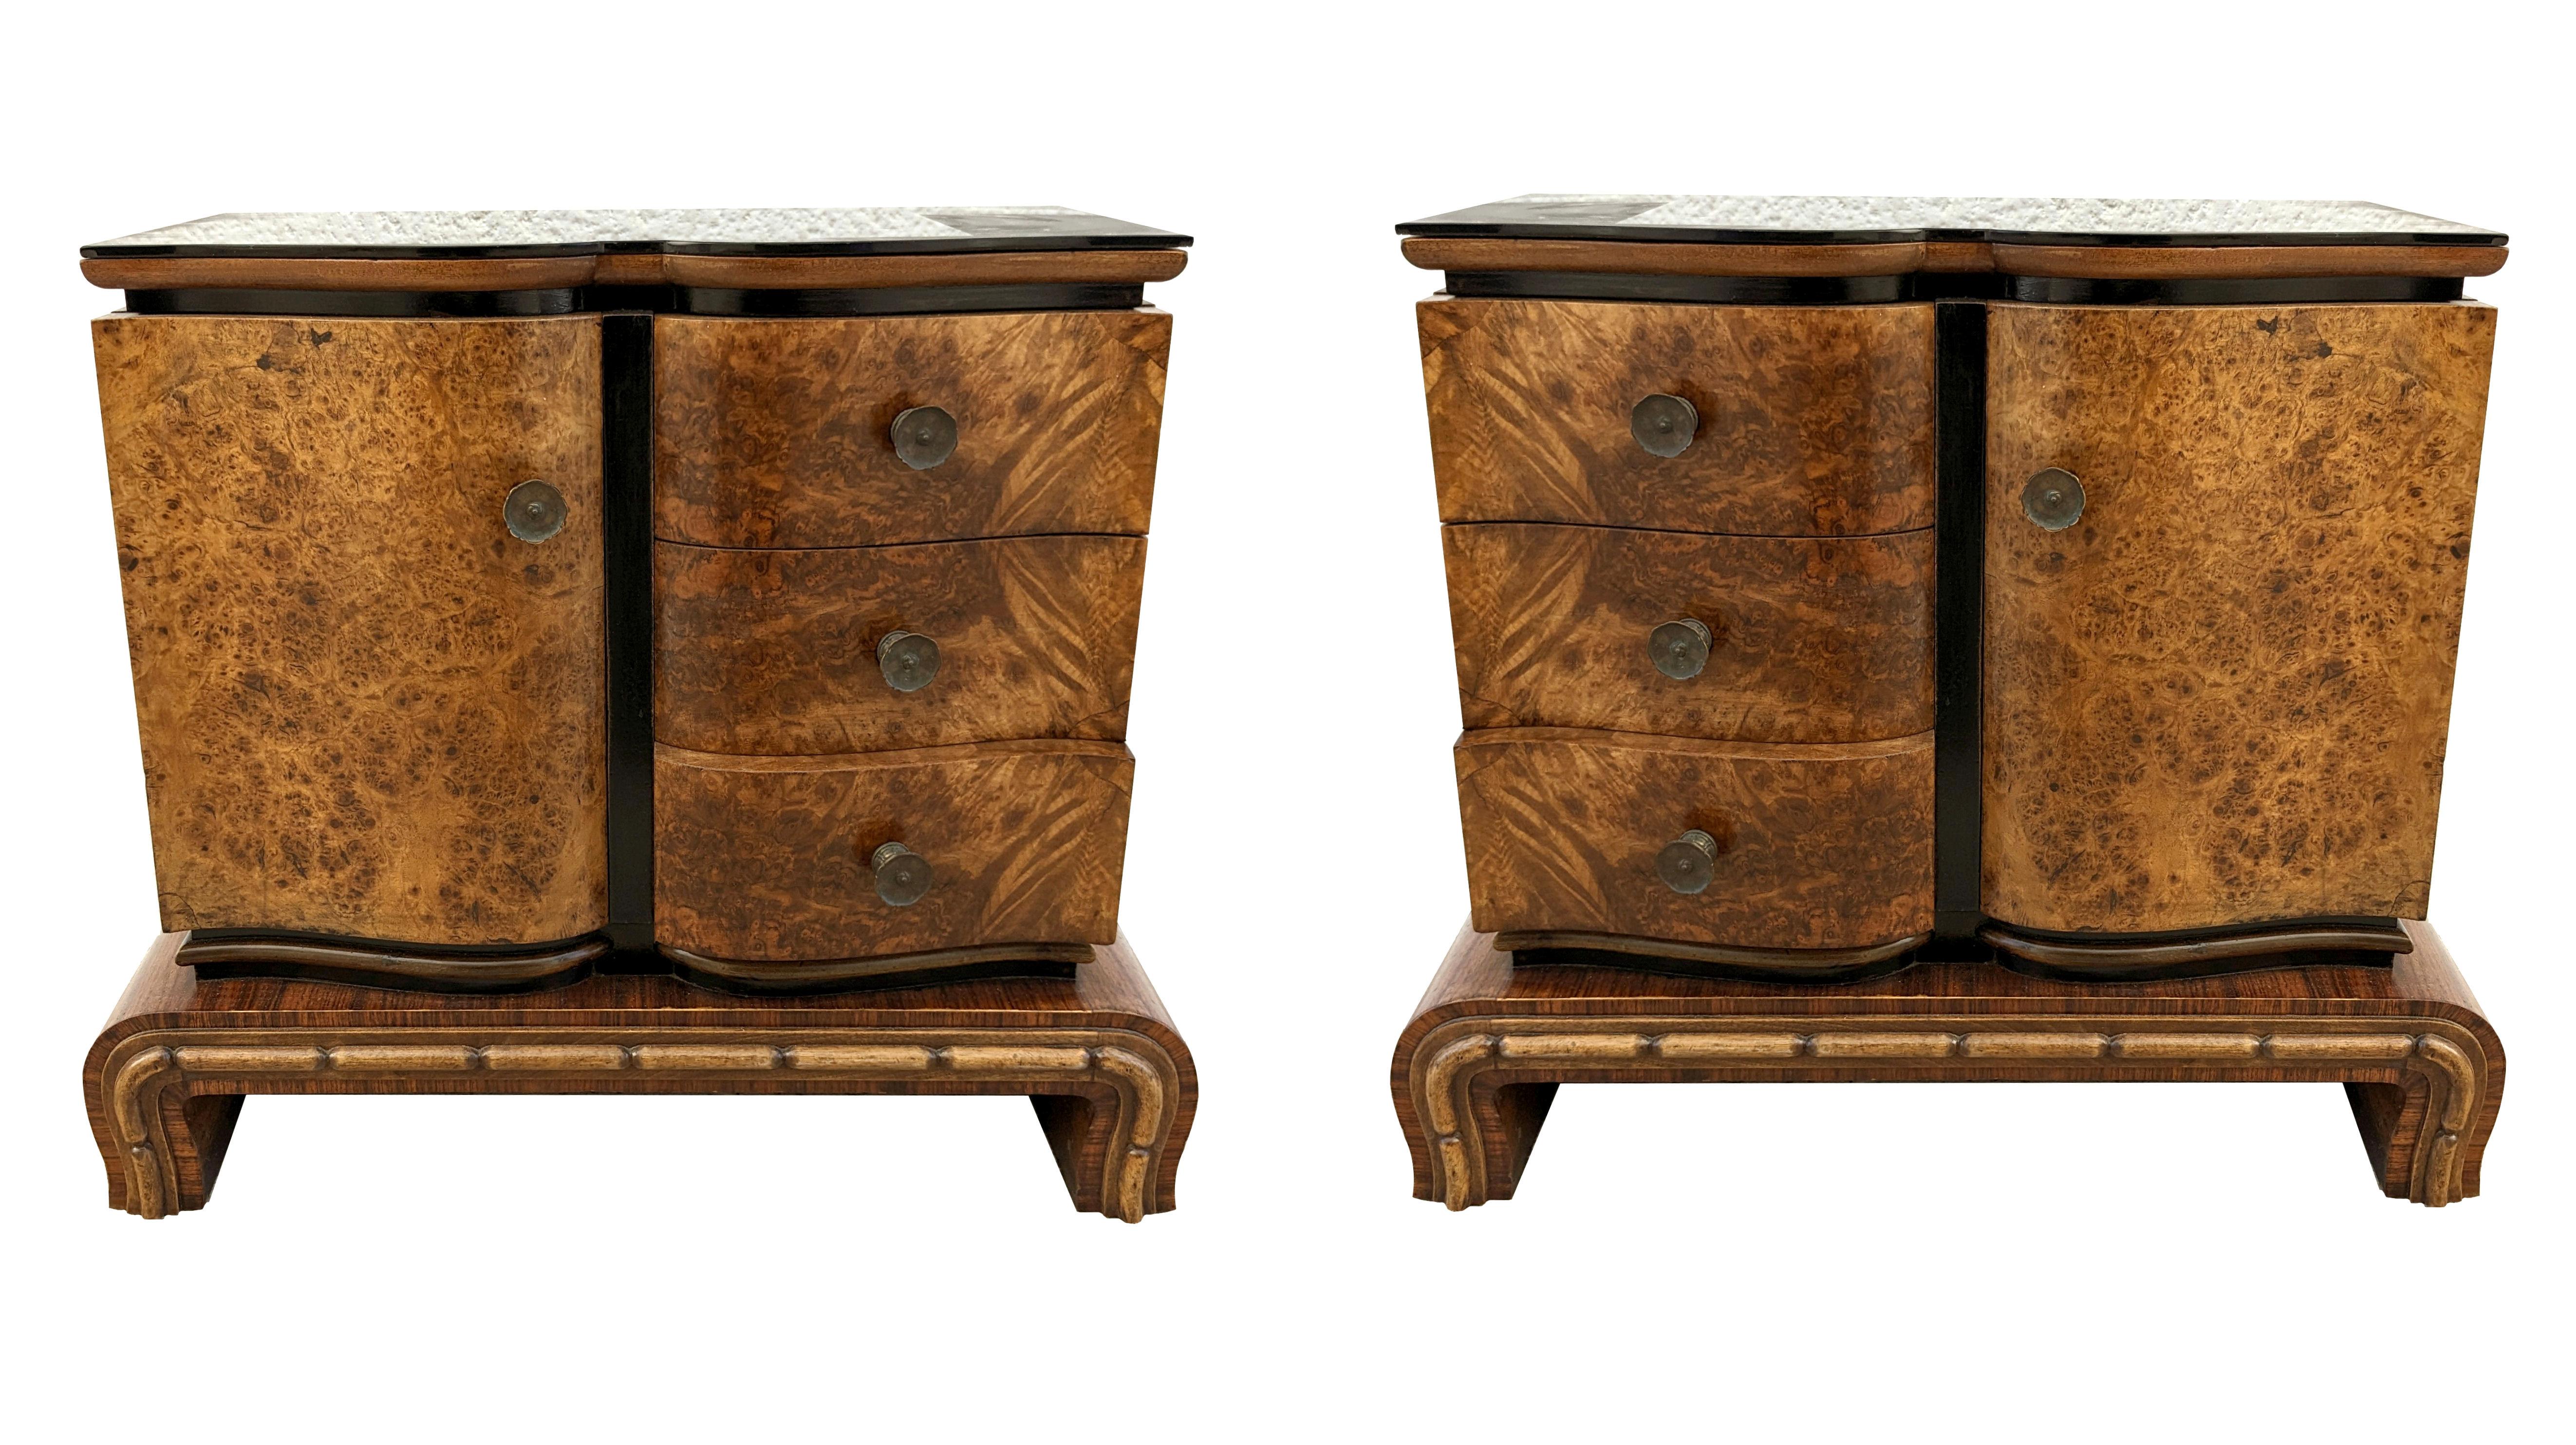 20th Century Art Deco Italian Pair of Matching Bedside Cabinet, Nightstands in Walnut, c1930 For Sale